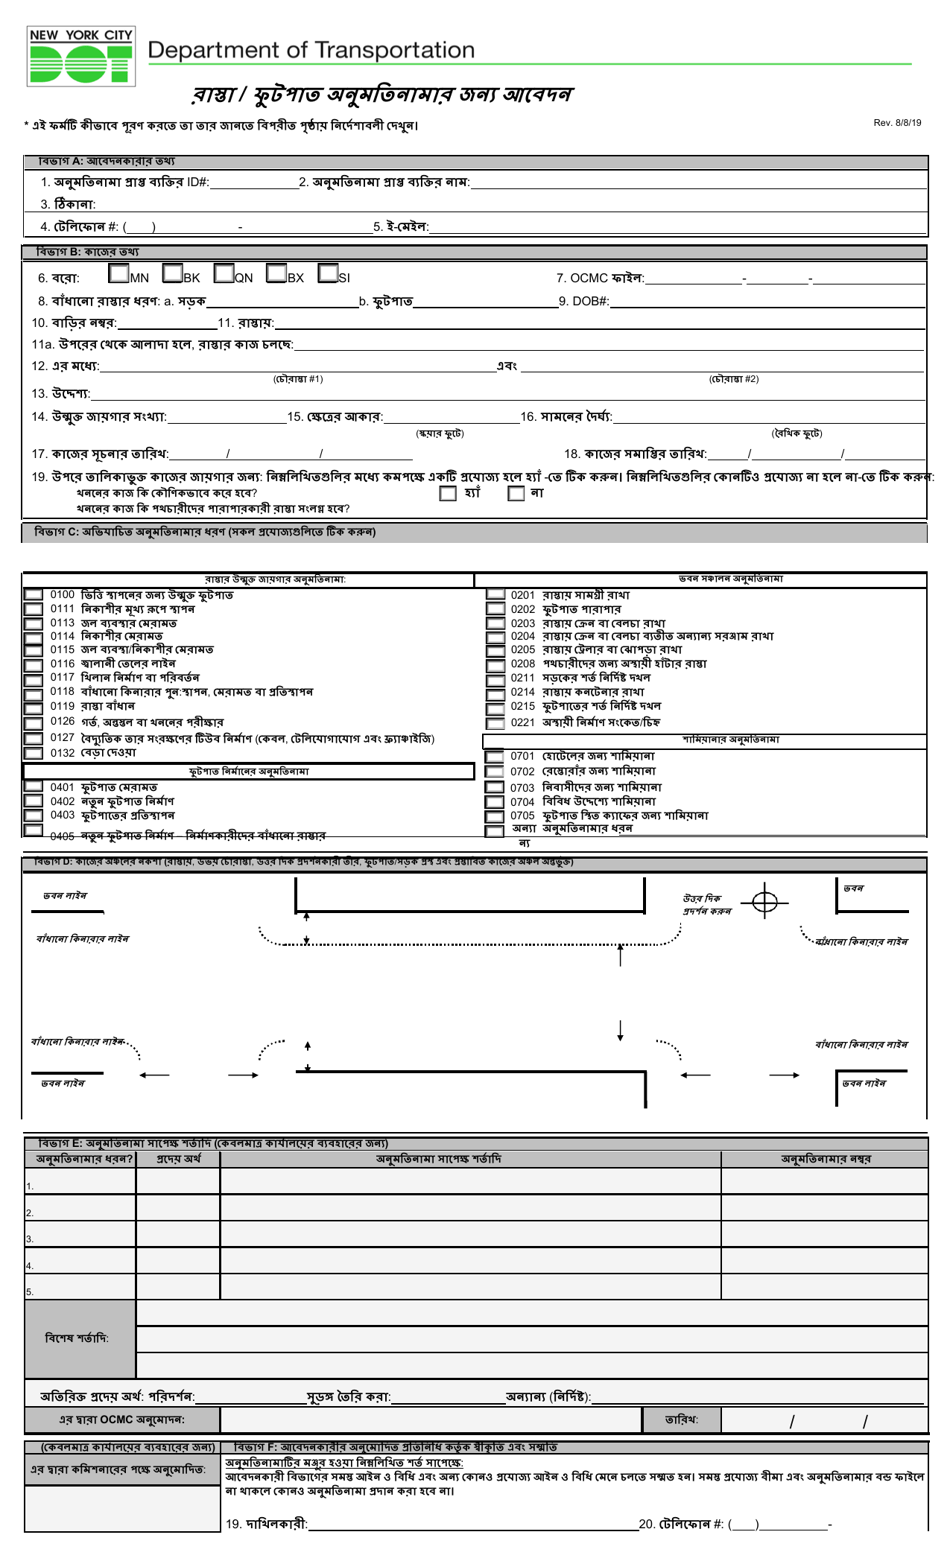 Application for Roadway / Sidewalk Permit(S) - New York City (Bengali), Page 1